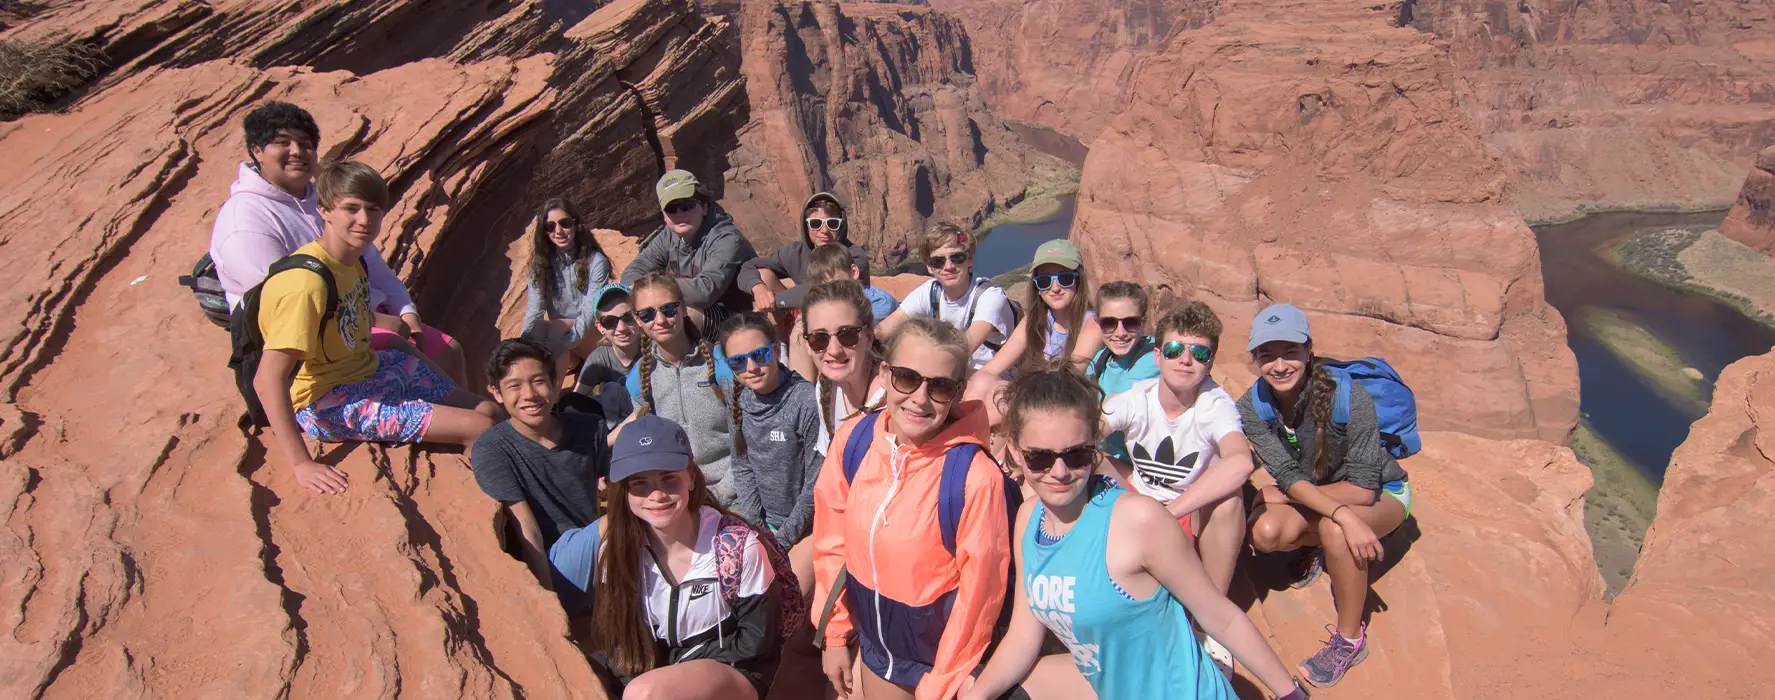 A group of students pose for a photo on the edge of the Grand Canyon with the Colorado River in the background.